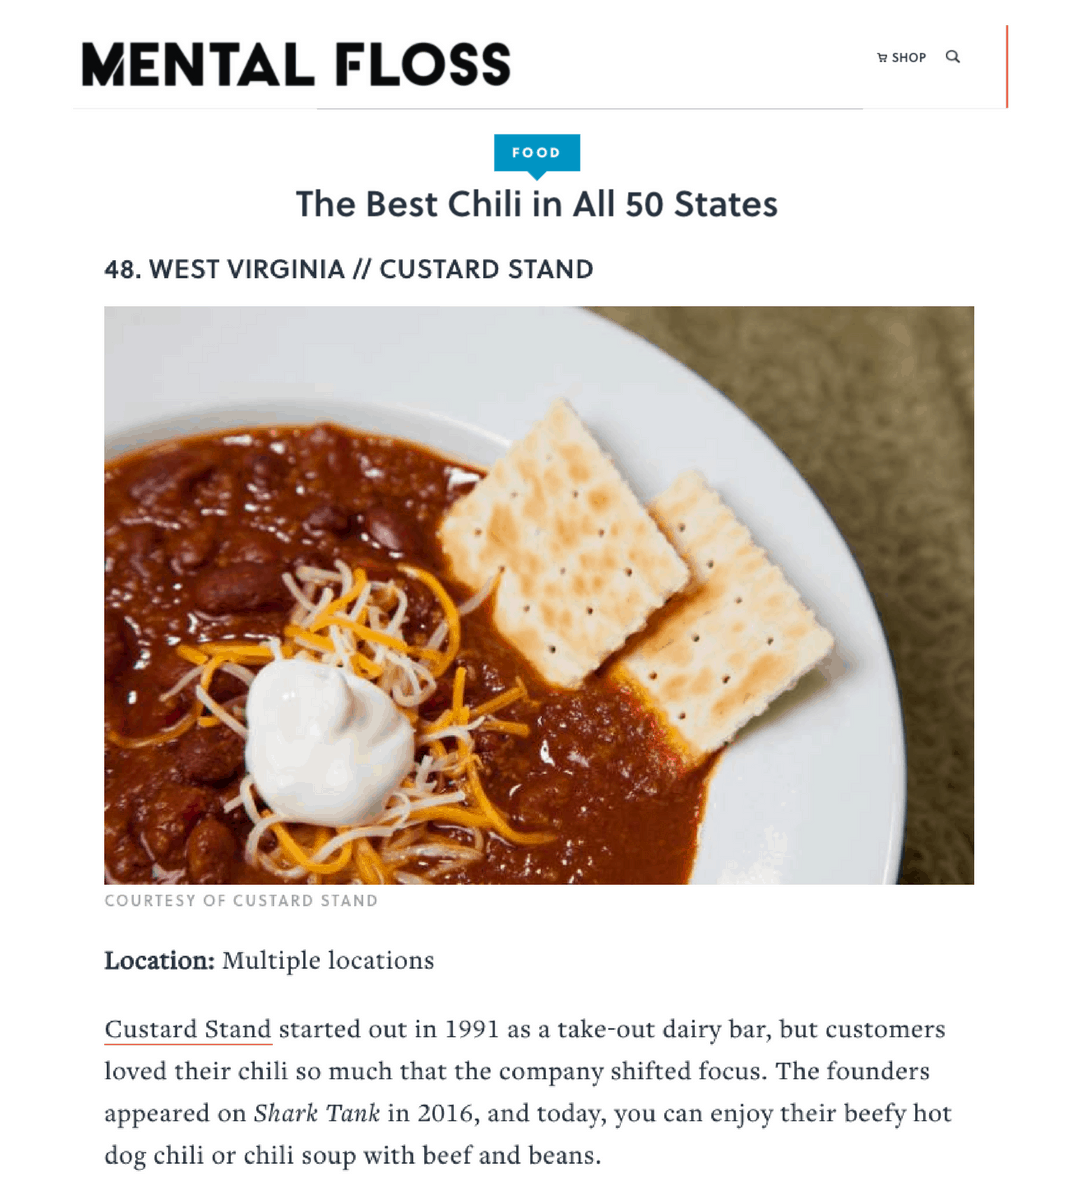 Custard Stand Chili Mental Floss Best Chili in 50 States